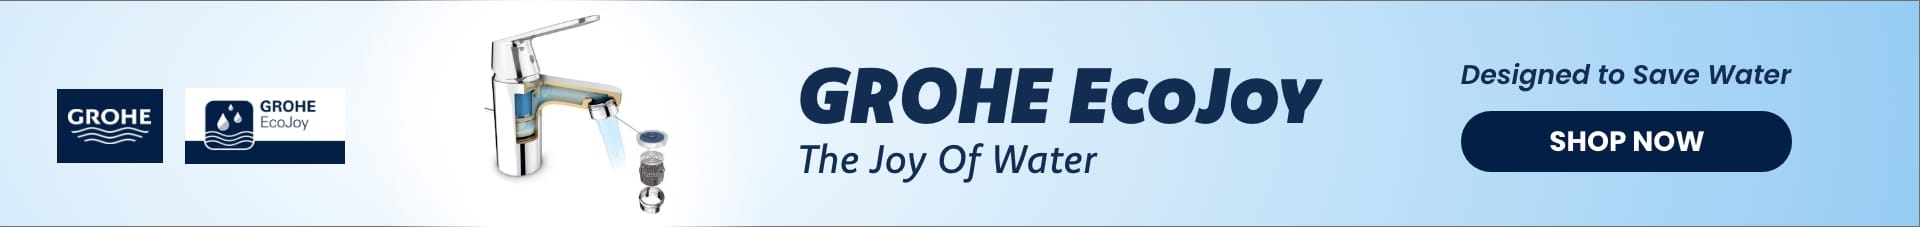 Water-saving Taps with GROHE EcoJoy at xTWOstore